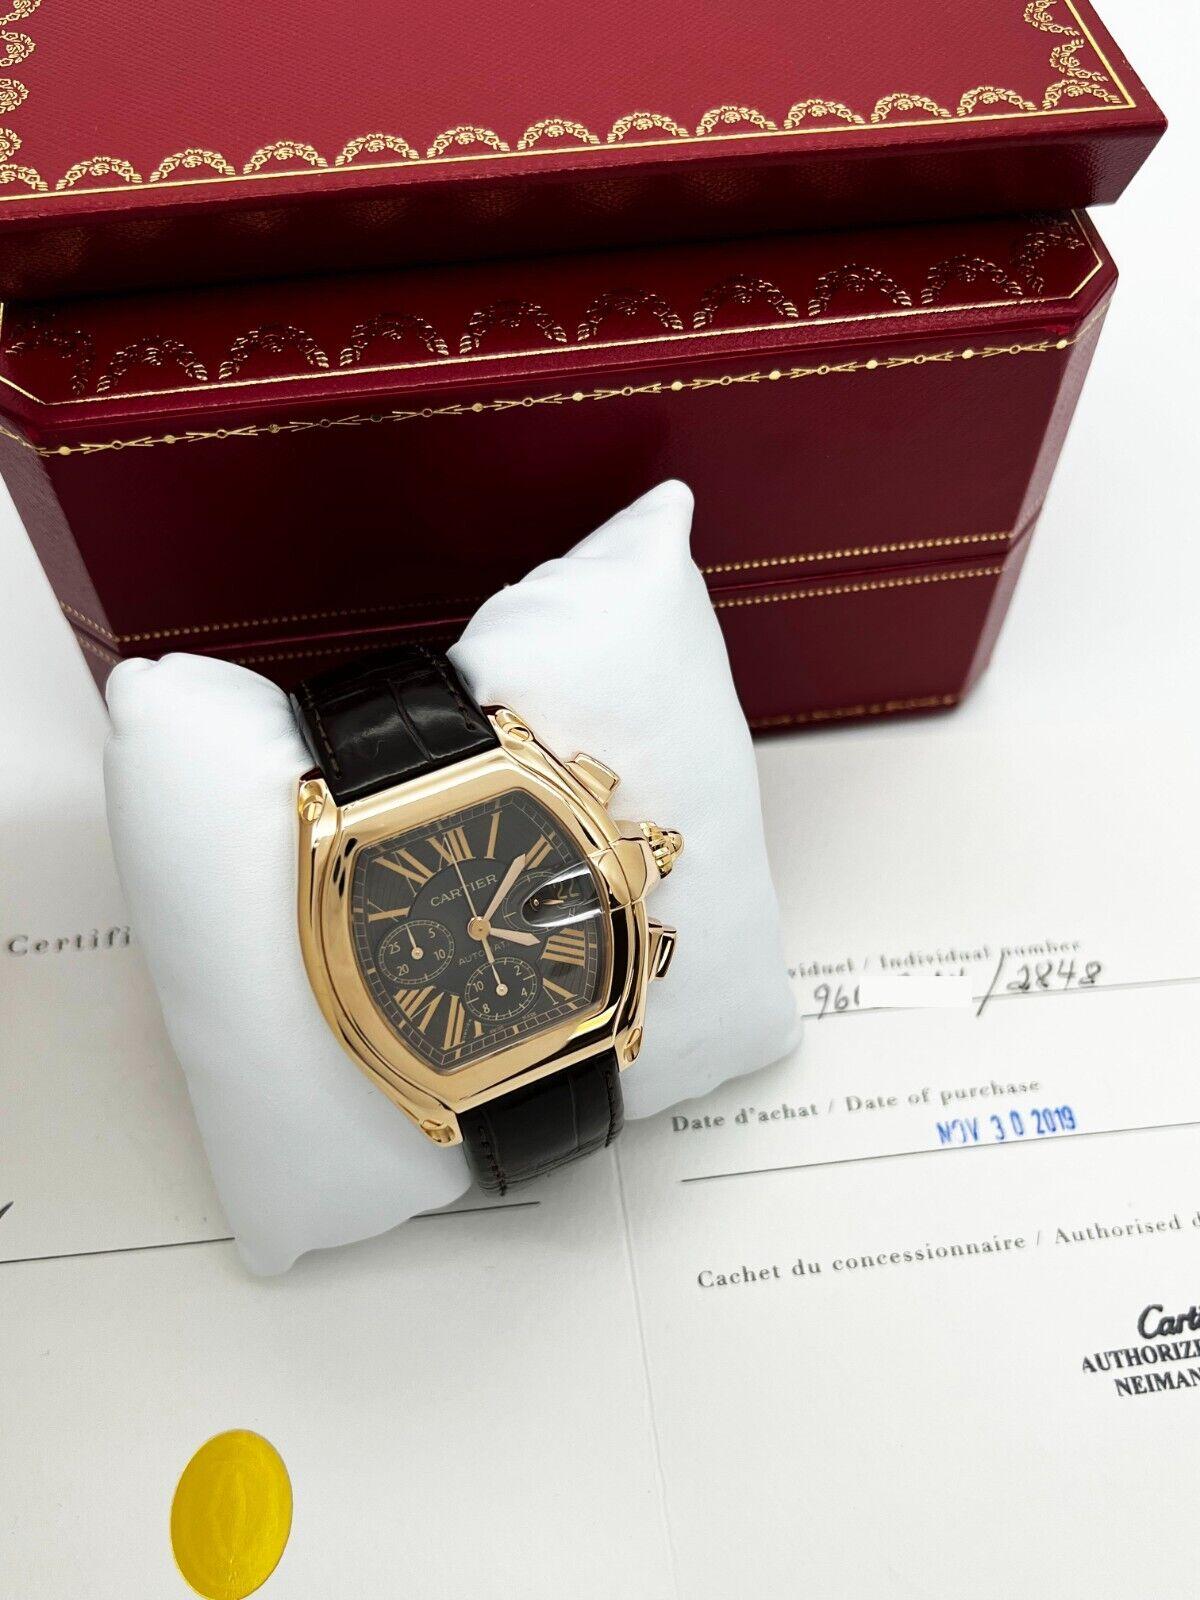 Style Number: Ref 2848

Year: 2019
 
Model: Roadster 
 
Case Material: 18K Rose Gold
 
Band: Leather 
 
Bezel:  18K Rose Gold 
 
Dial: Brown
 
Face: Sapphire Crystal
 
Case Size: 47mm x 43mm
 
Includes: 
-Cartier Box & Paper
-Certified Appraisal 
-1